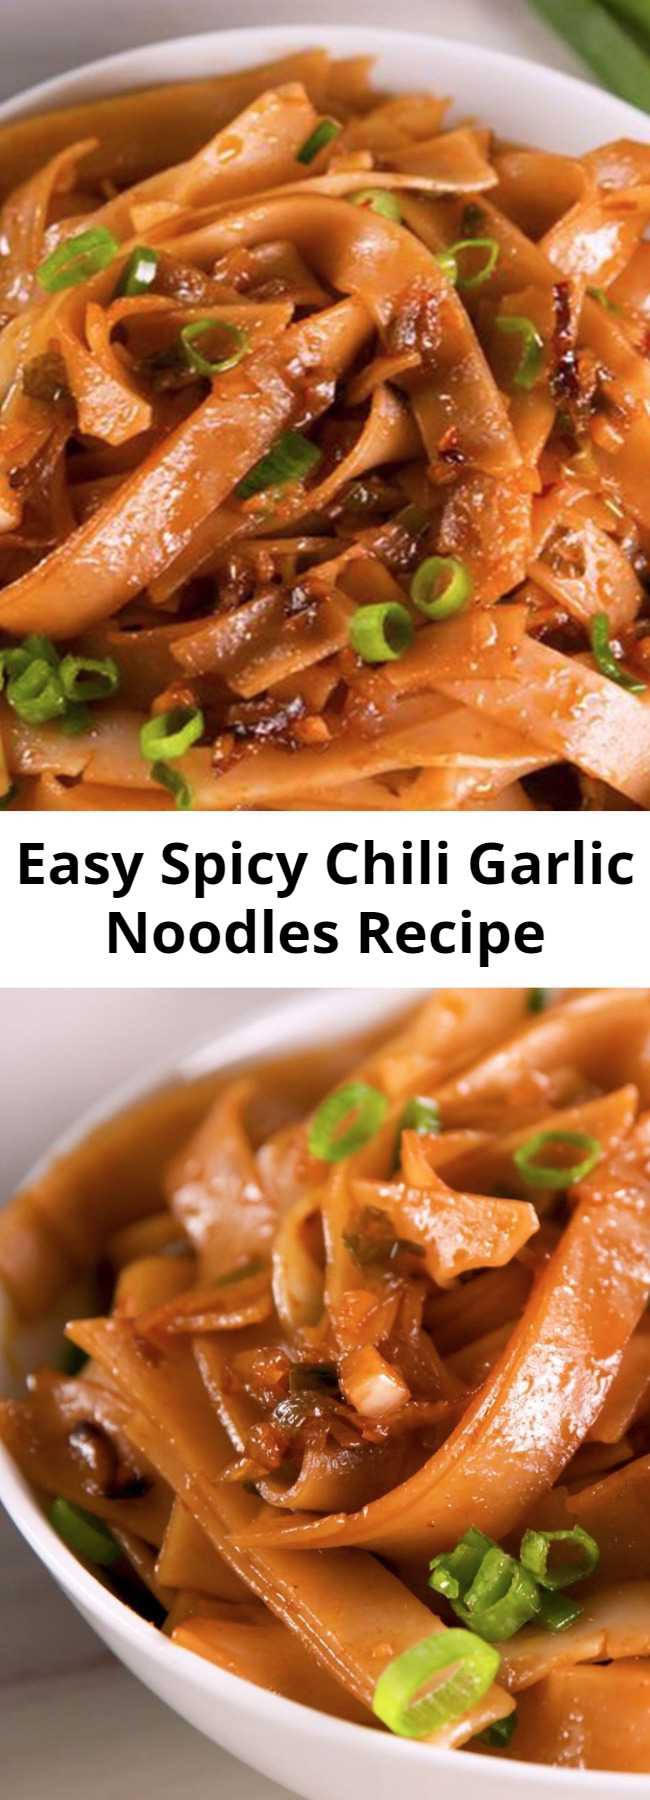 Easy Spicy Chili Garlic Noodles Recipe - The sauce for these noodles come together in less time than it takes your pasta water to boil. This dish is easy, fast, and spicy. Adjust the chili garlic sauce as you like, but we love the sweet heat of this dish as is. Prepare yourselves. #easyrecipe #food #noodles #asian #pasta